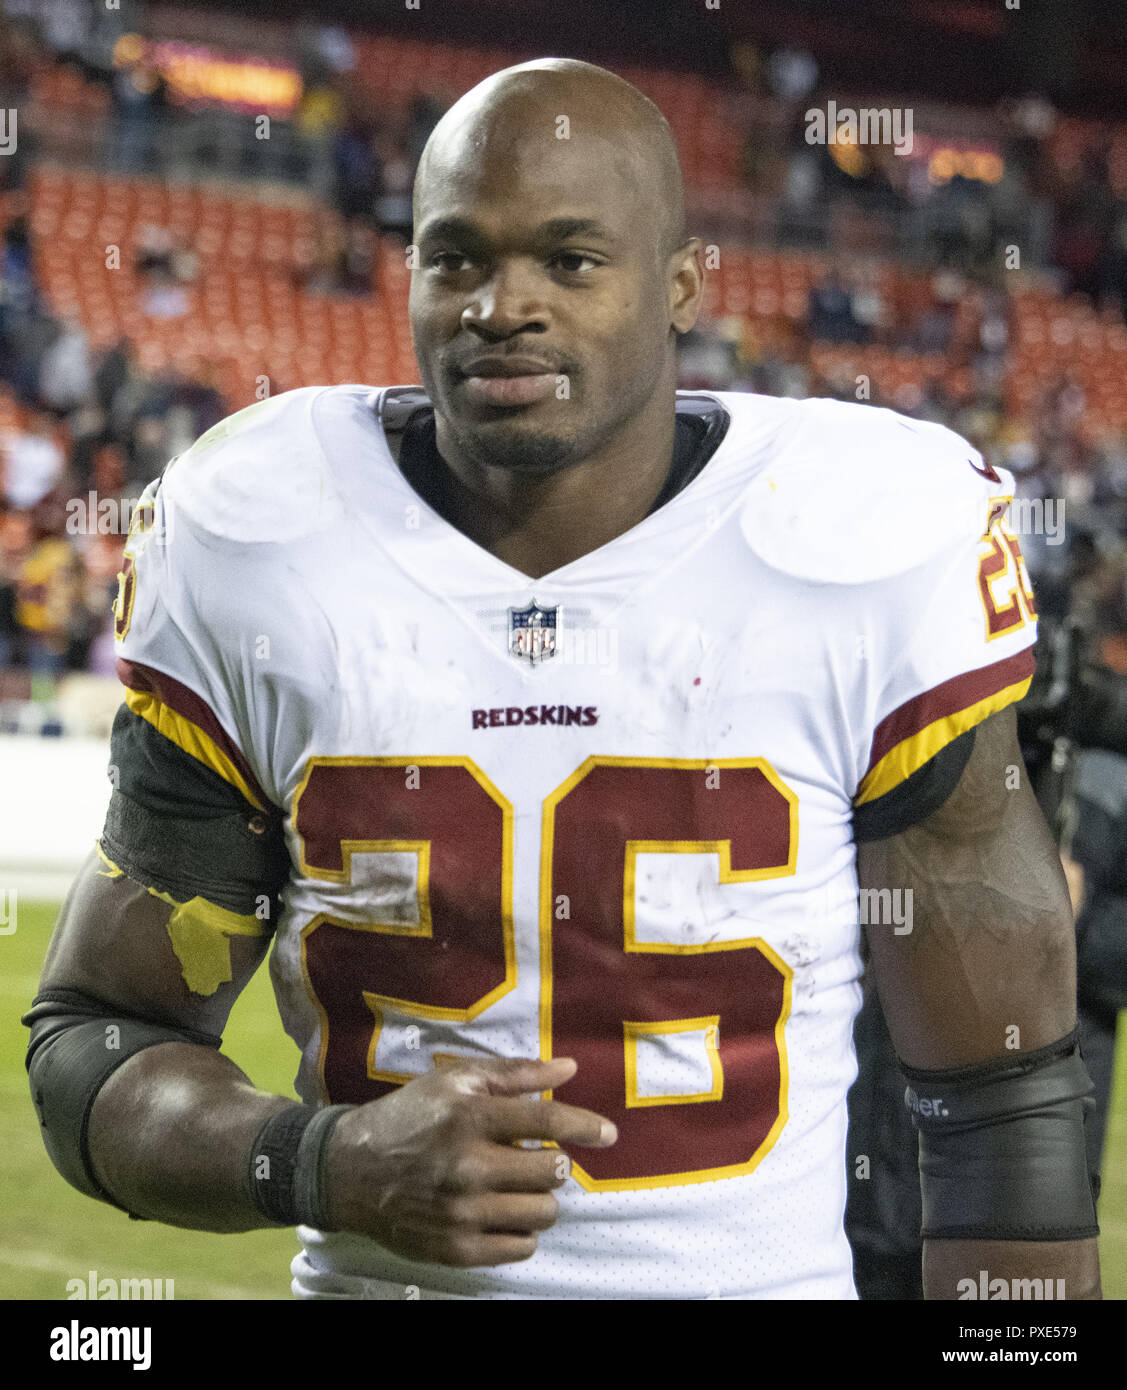 Landover, Maryland, USA. 21st Oct, 2018. Washington Redskins running back Adrian Peterson (26) leaves the field following his team's 20 - 17 victory over the Dallas Cowboys at FedEx Field in Landover, Maryland on Sunday, October 21, 2018. Credit: Ron Sachs/CNP Credit: Ron Sachs/CNP/ZUMA Wire/Alamy Live News Stock Photo